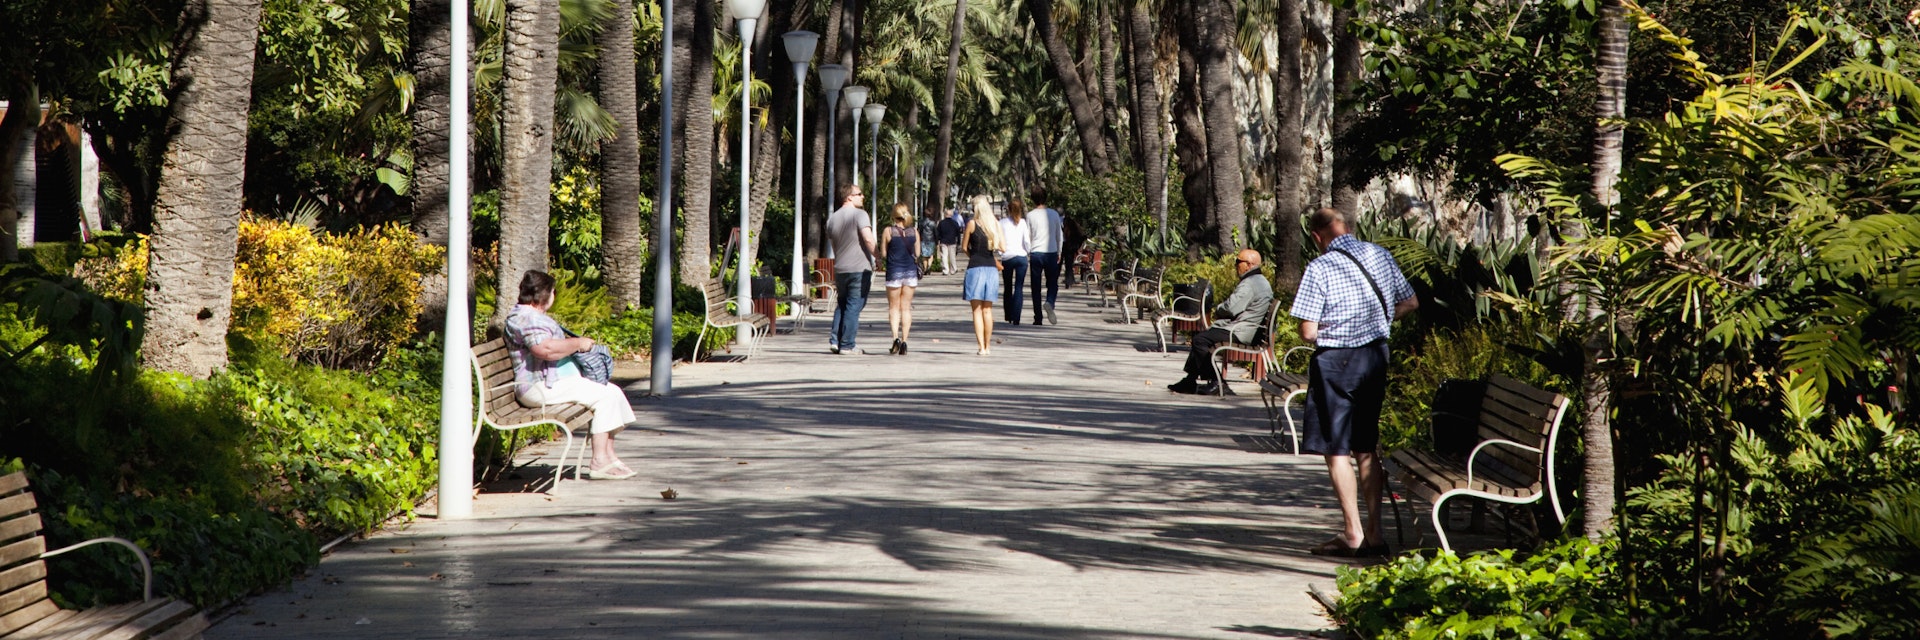 Pedestrians Walking Down A Path Lined With Palm Trees